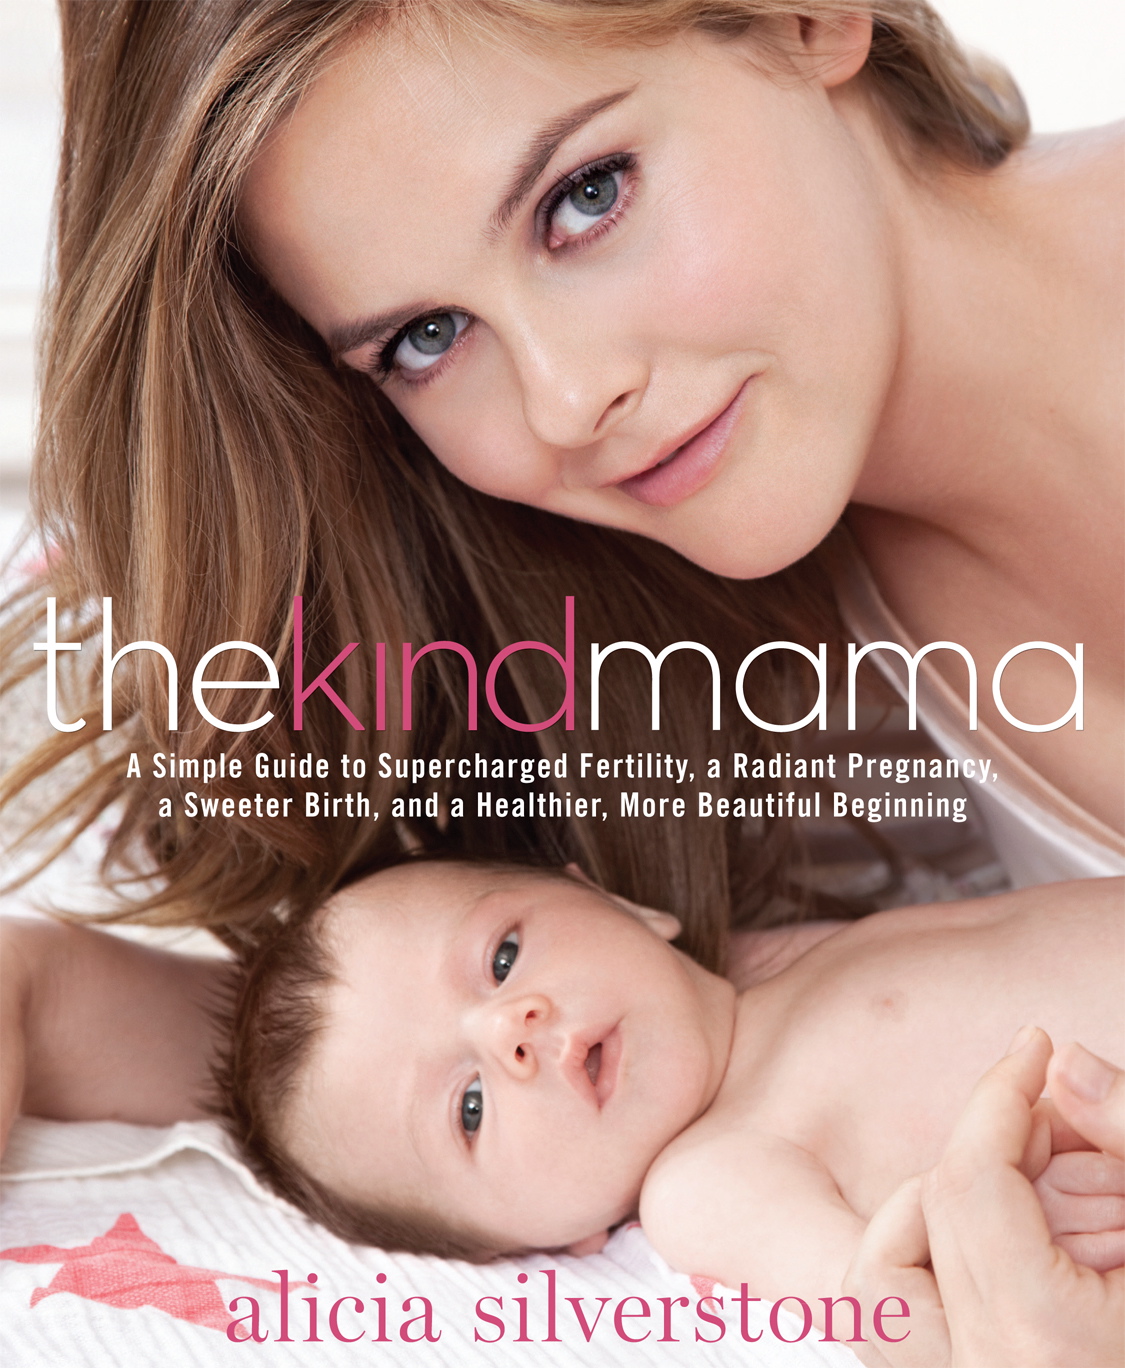 &quot;The Kind Mama: A Simple Guide to Supercharged Fertility, a Radiant Pregnancy, a Sweeter Birth, and a Healthier, More Beautiful Beginning,&quot; by Alicia Silverstone